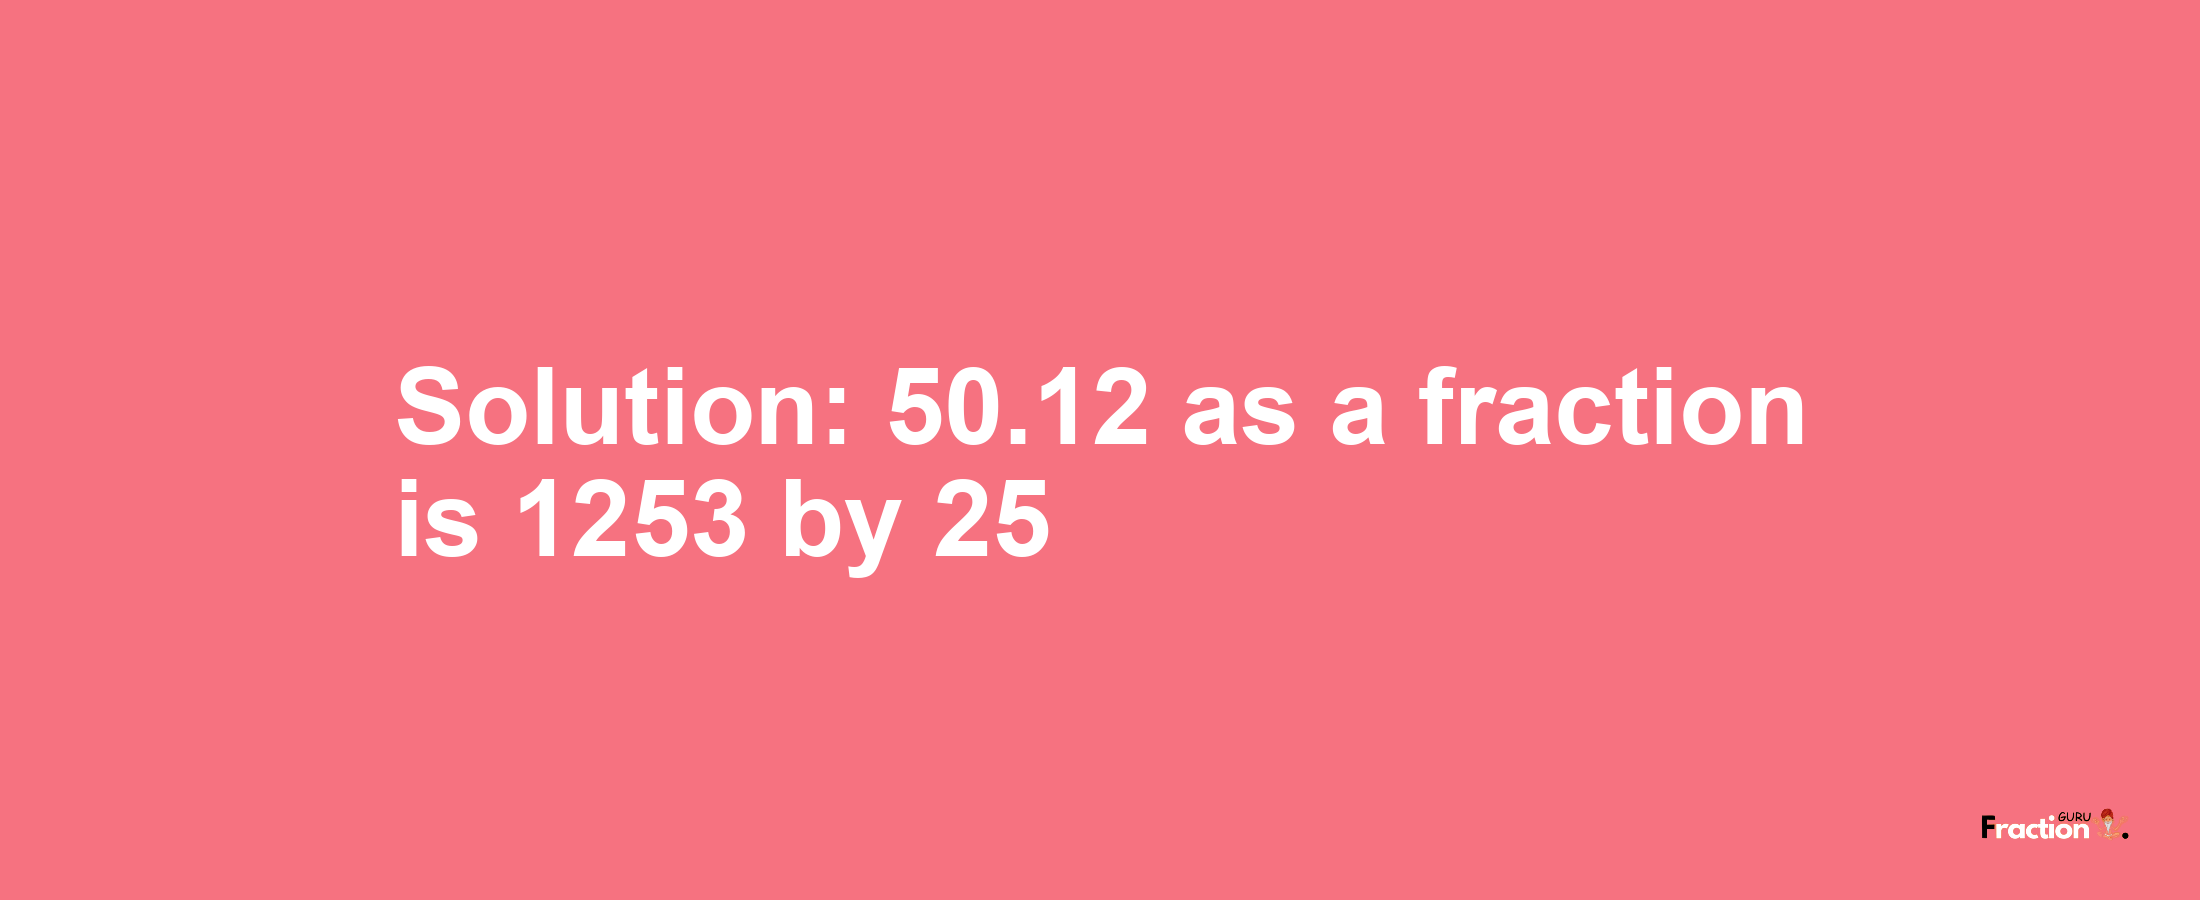 Solution:50.12 as a fraction is 1253/25